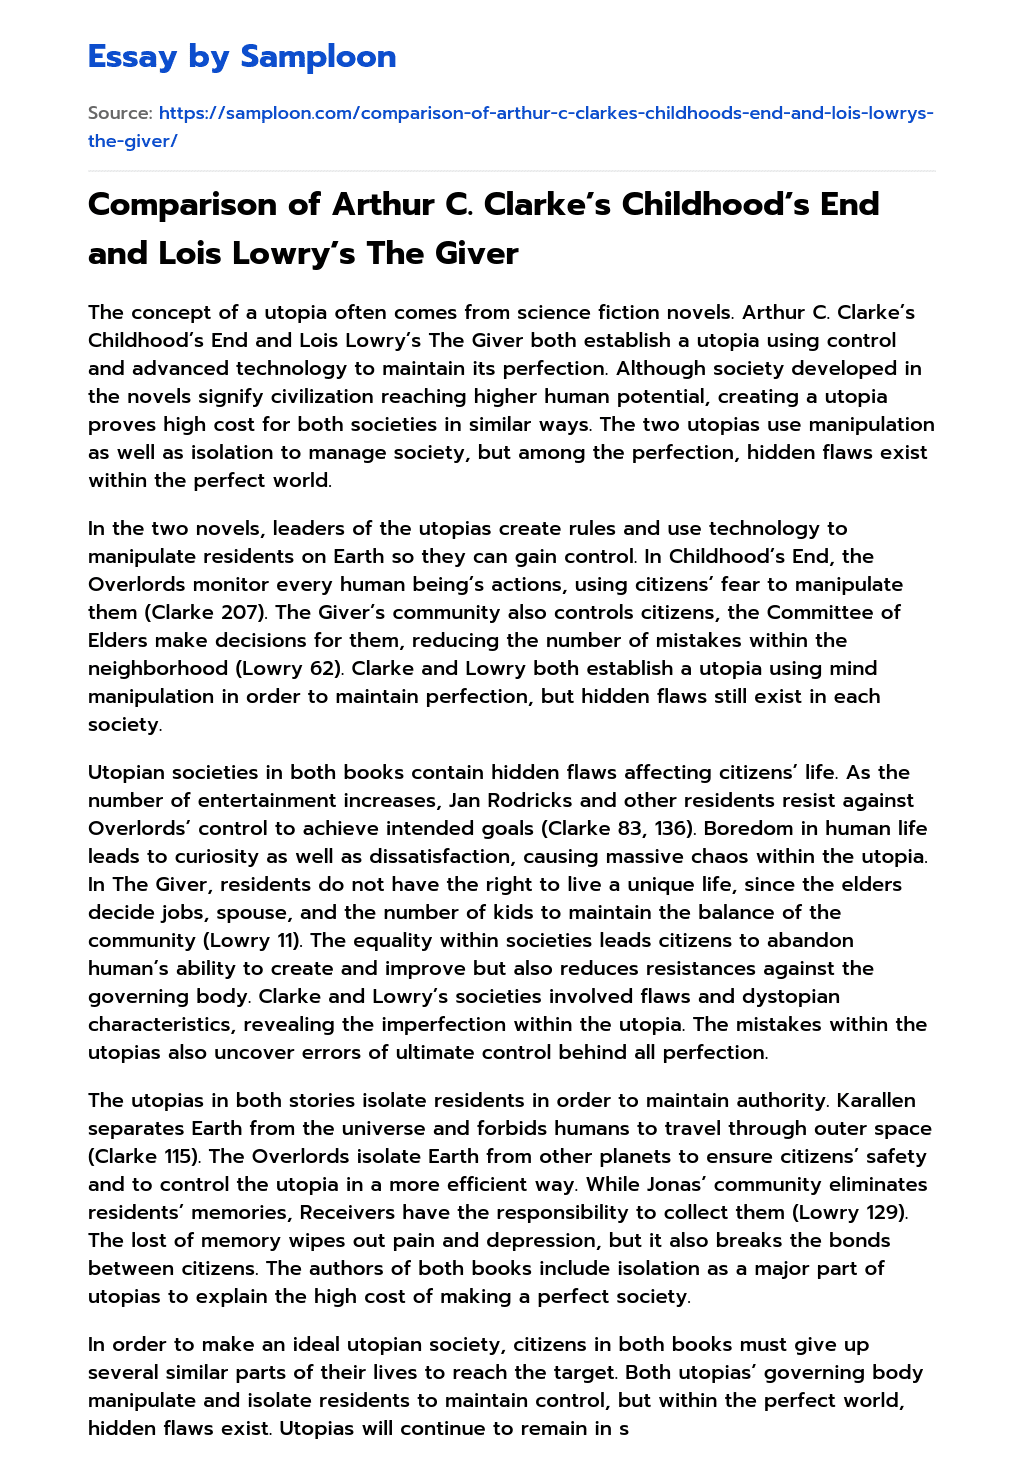 Comparison of Arthur C. Clarke’s Childhood’s End and Lois Lowry’s The Giver essay